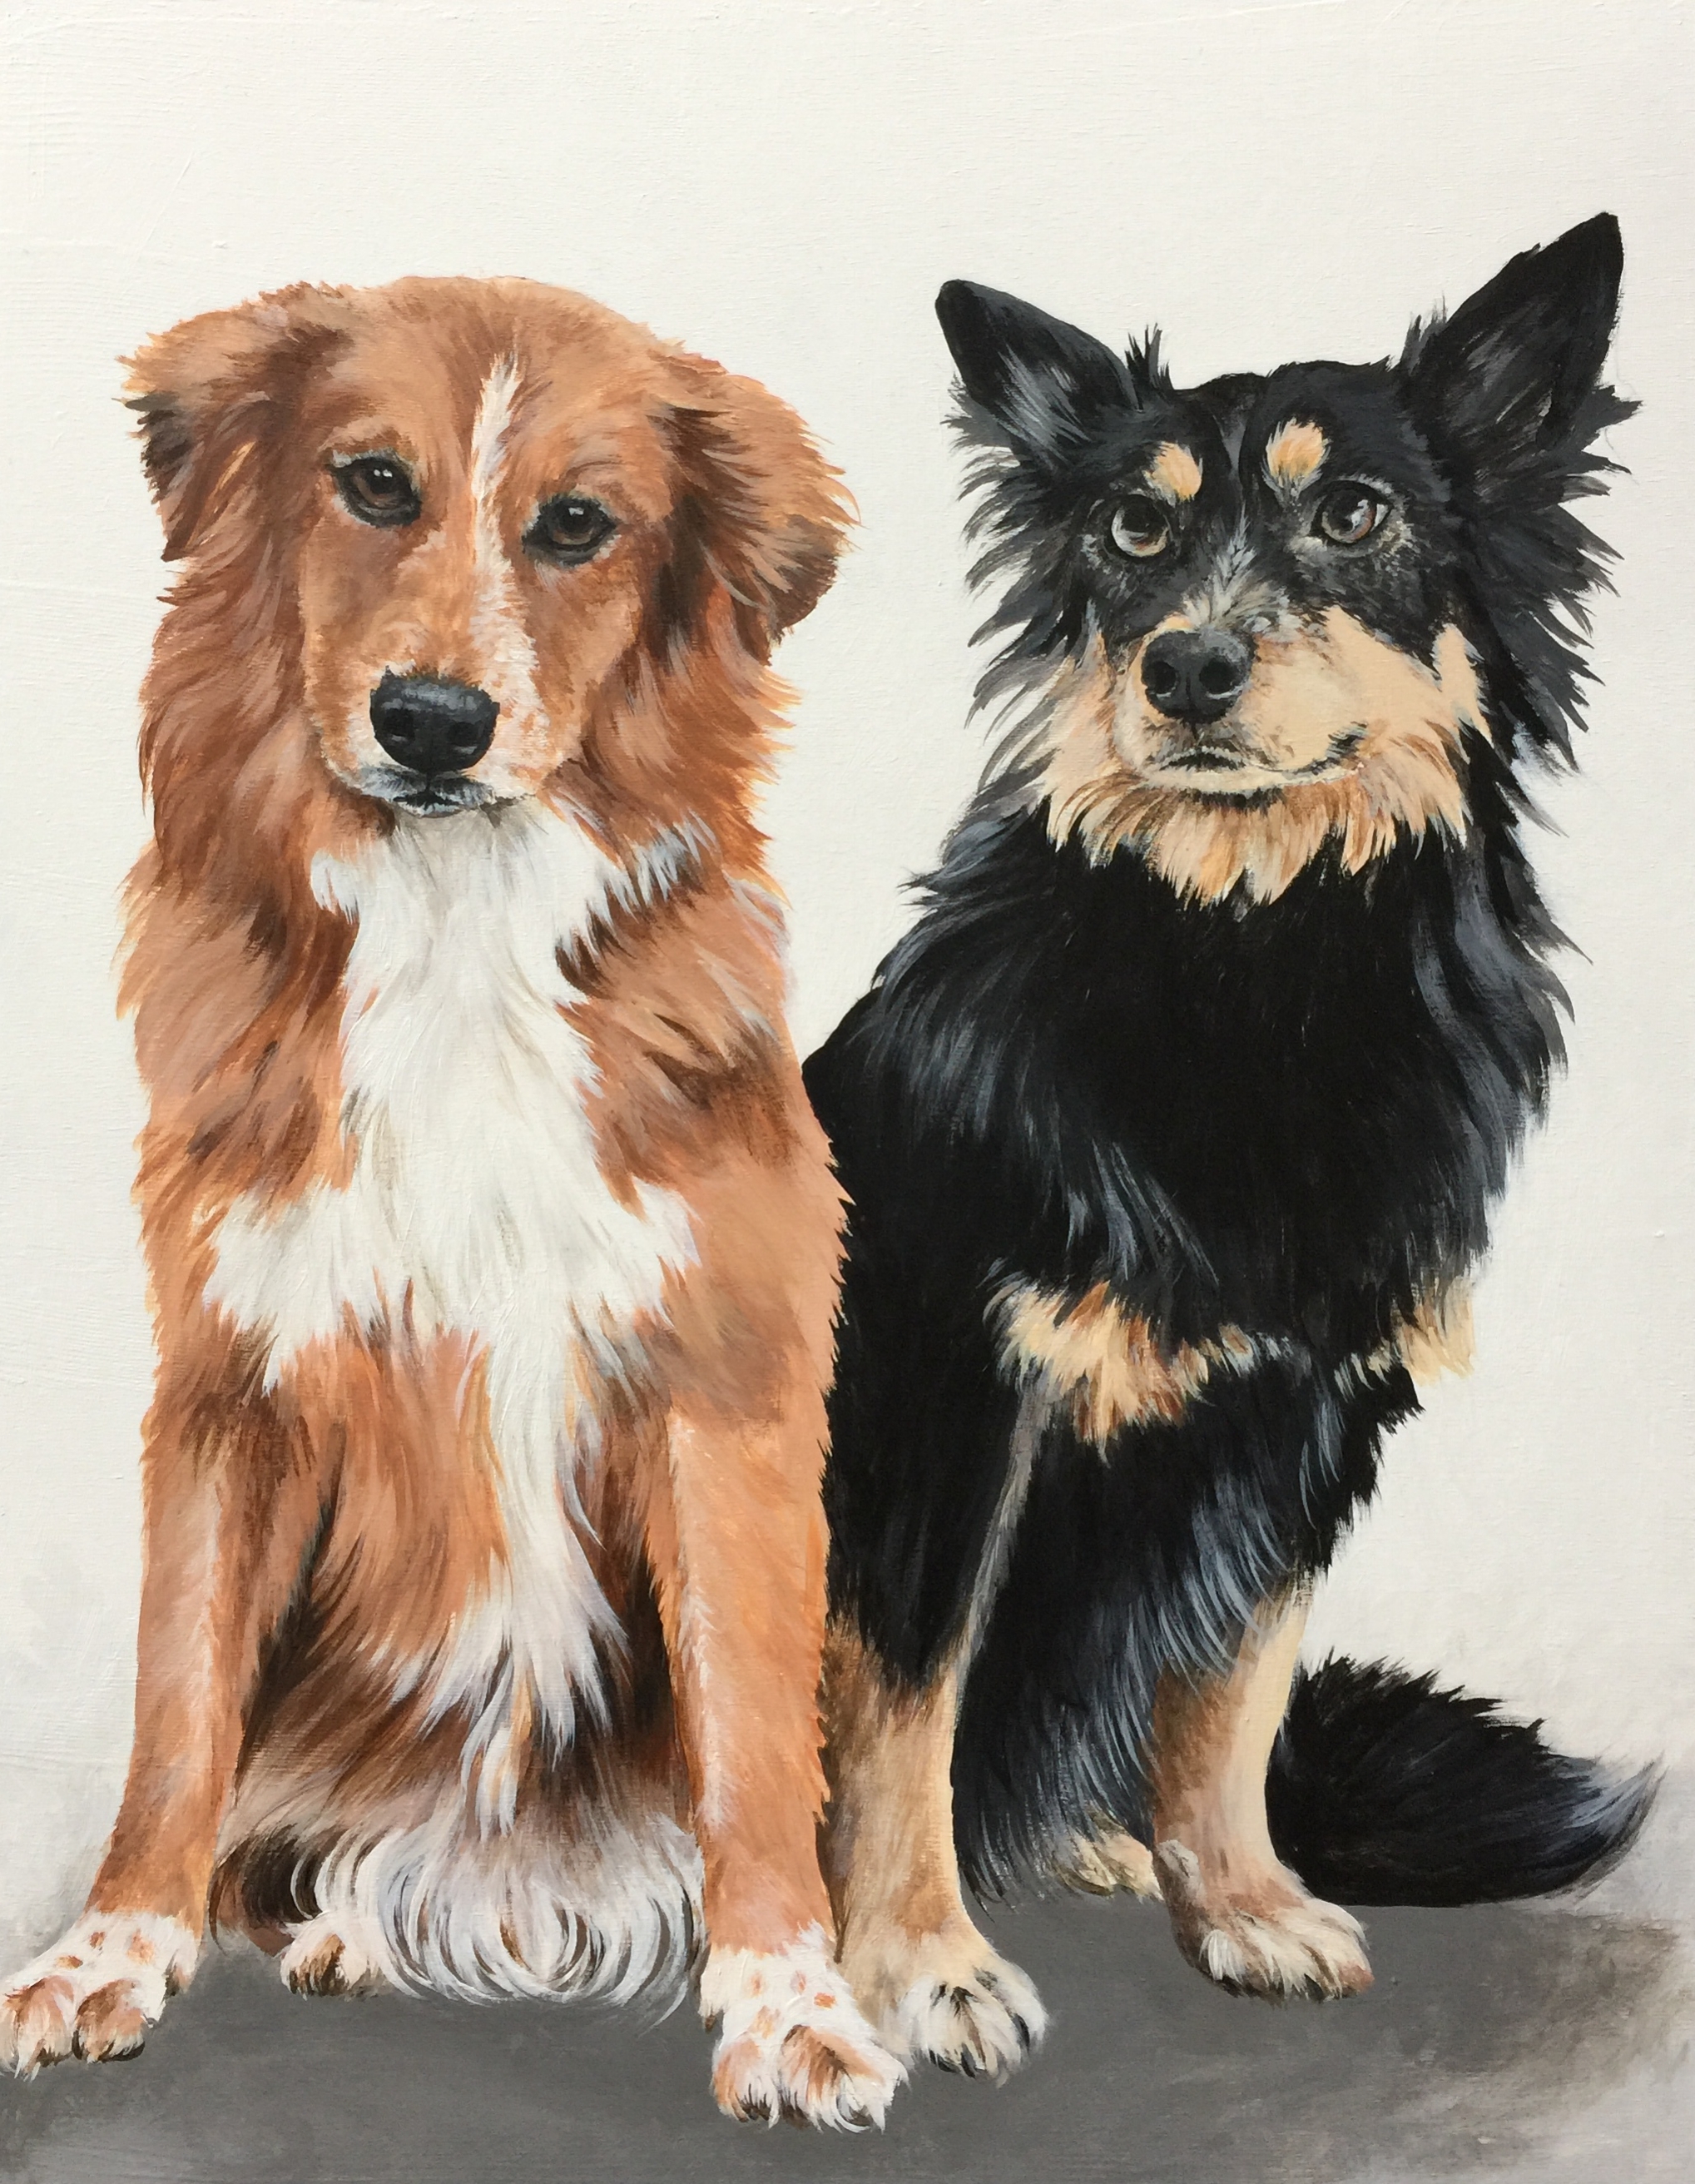  Milley and Cowboy the rescue mutts - commissioned by Janet 